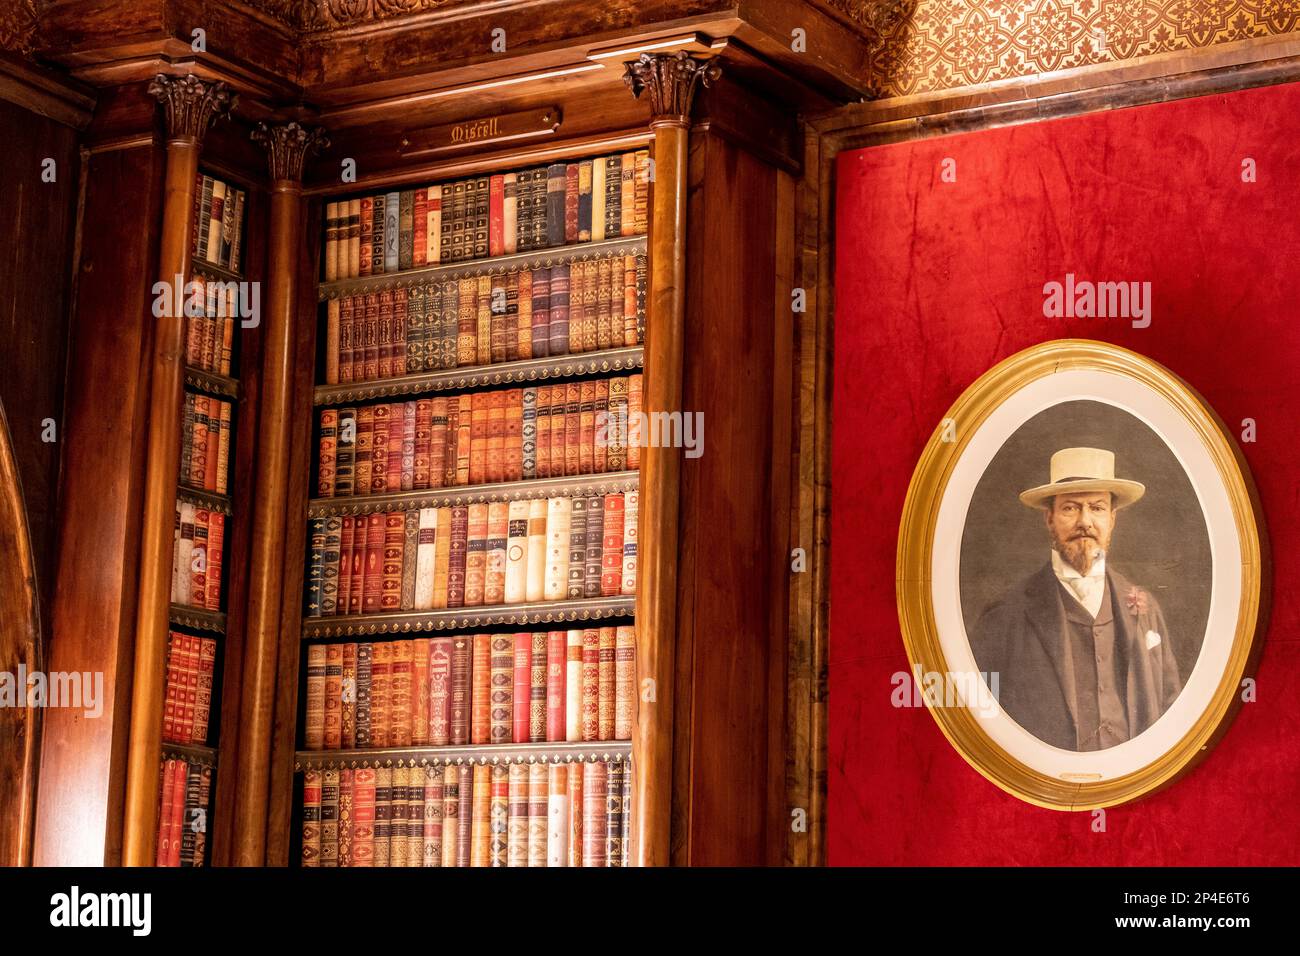 Library at Monserrate Palace, Sintra, Portugal, portrait of an English gentleman on the wall Stock Photo